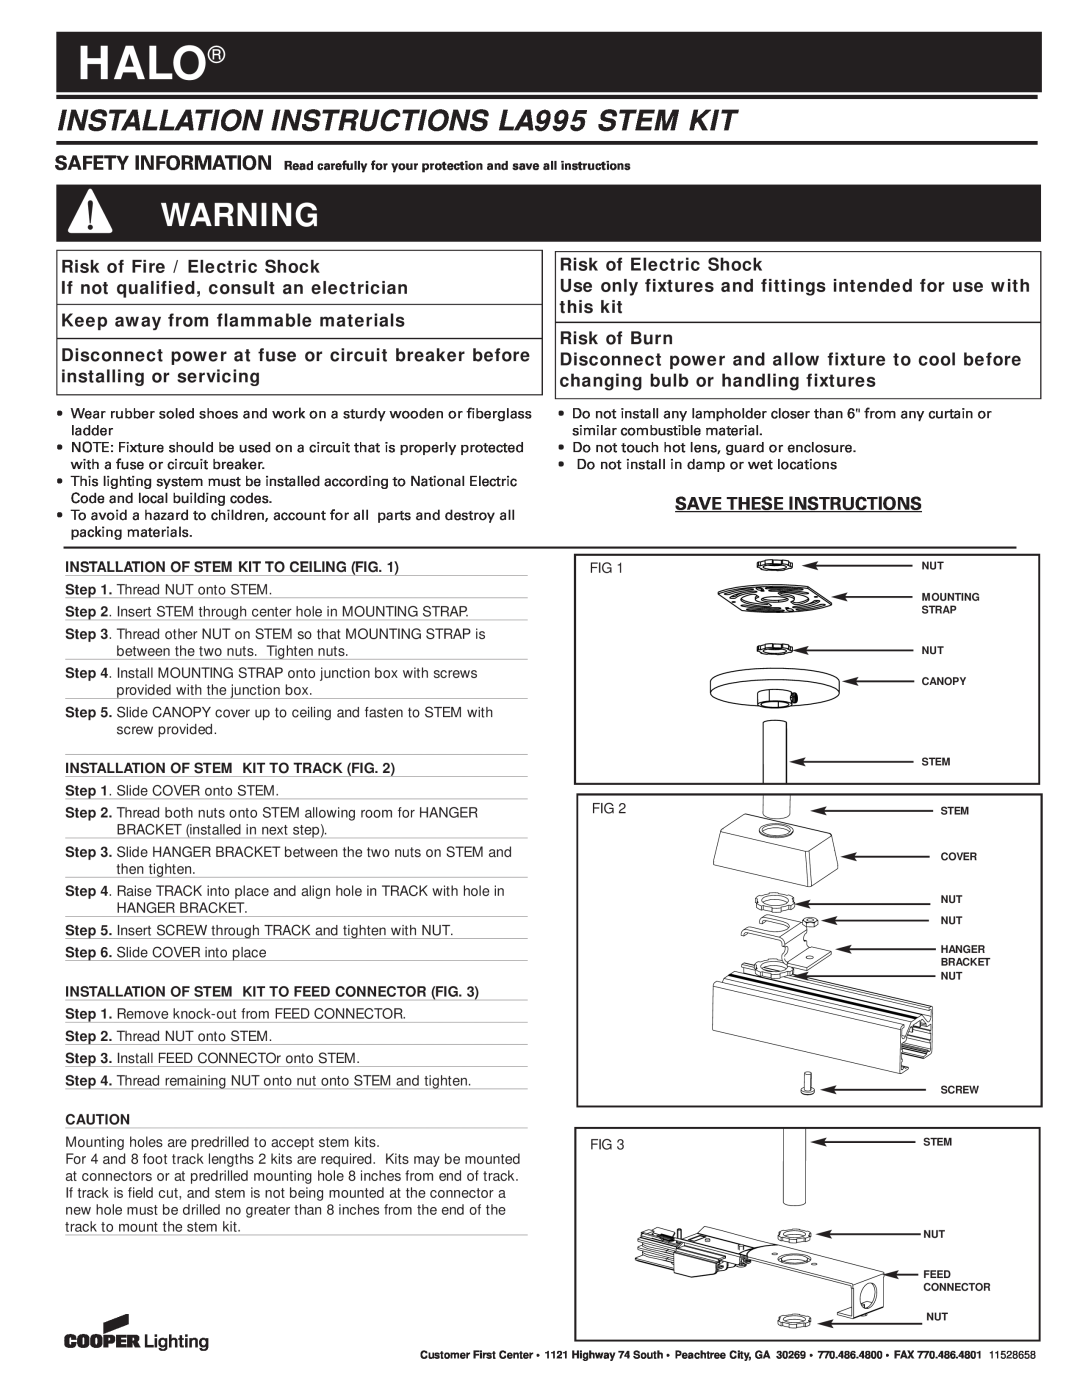 Cooper Lighting installation instructions Halo, INSTALLATION INSTRUCTIONS LA995 STEM KIT, Risk of Fire / Electric Shock 